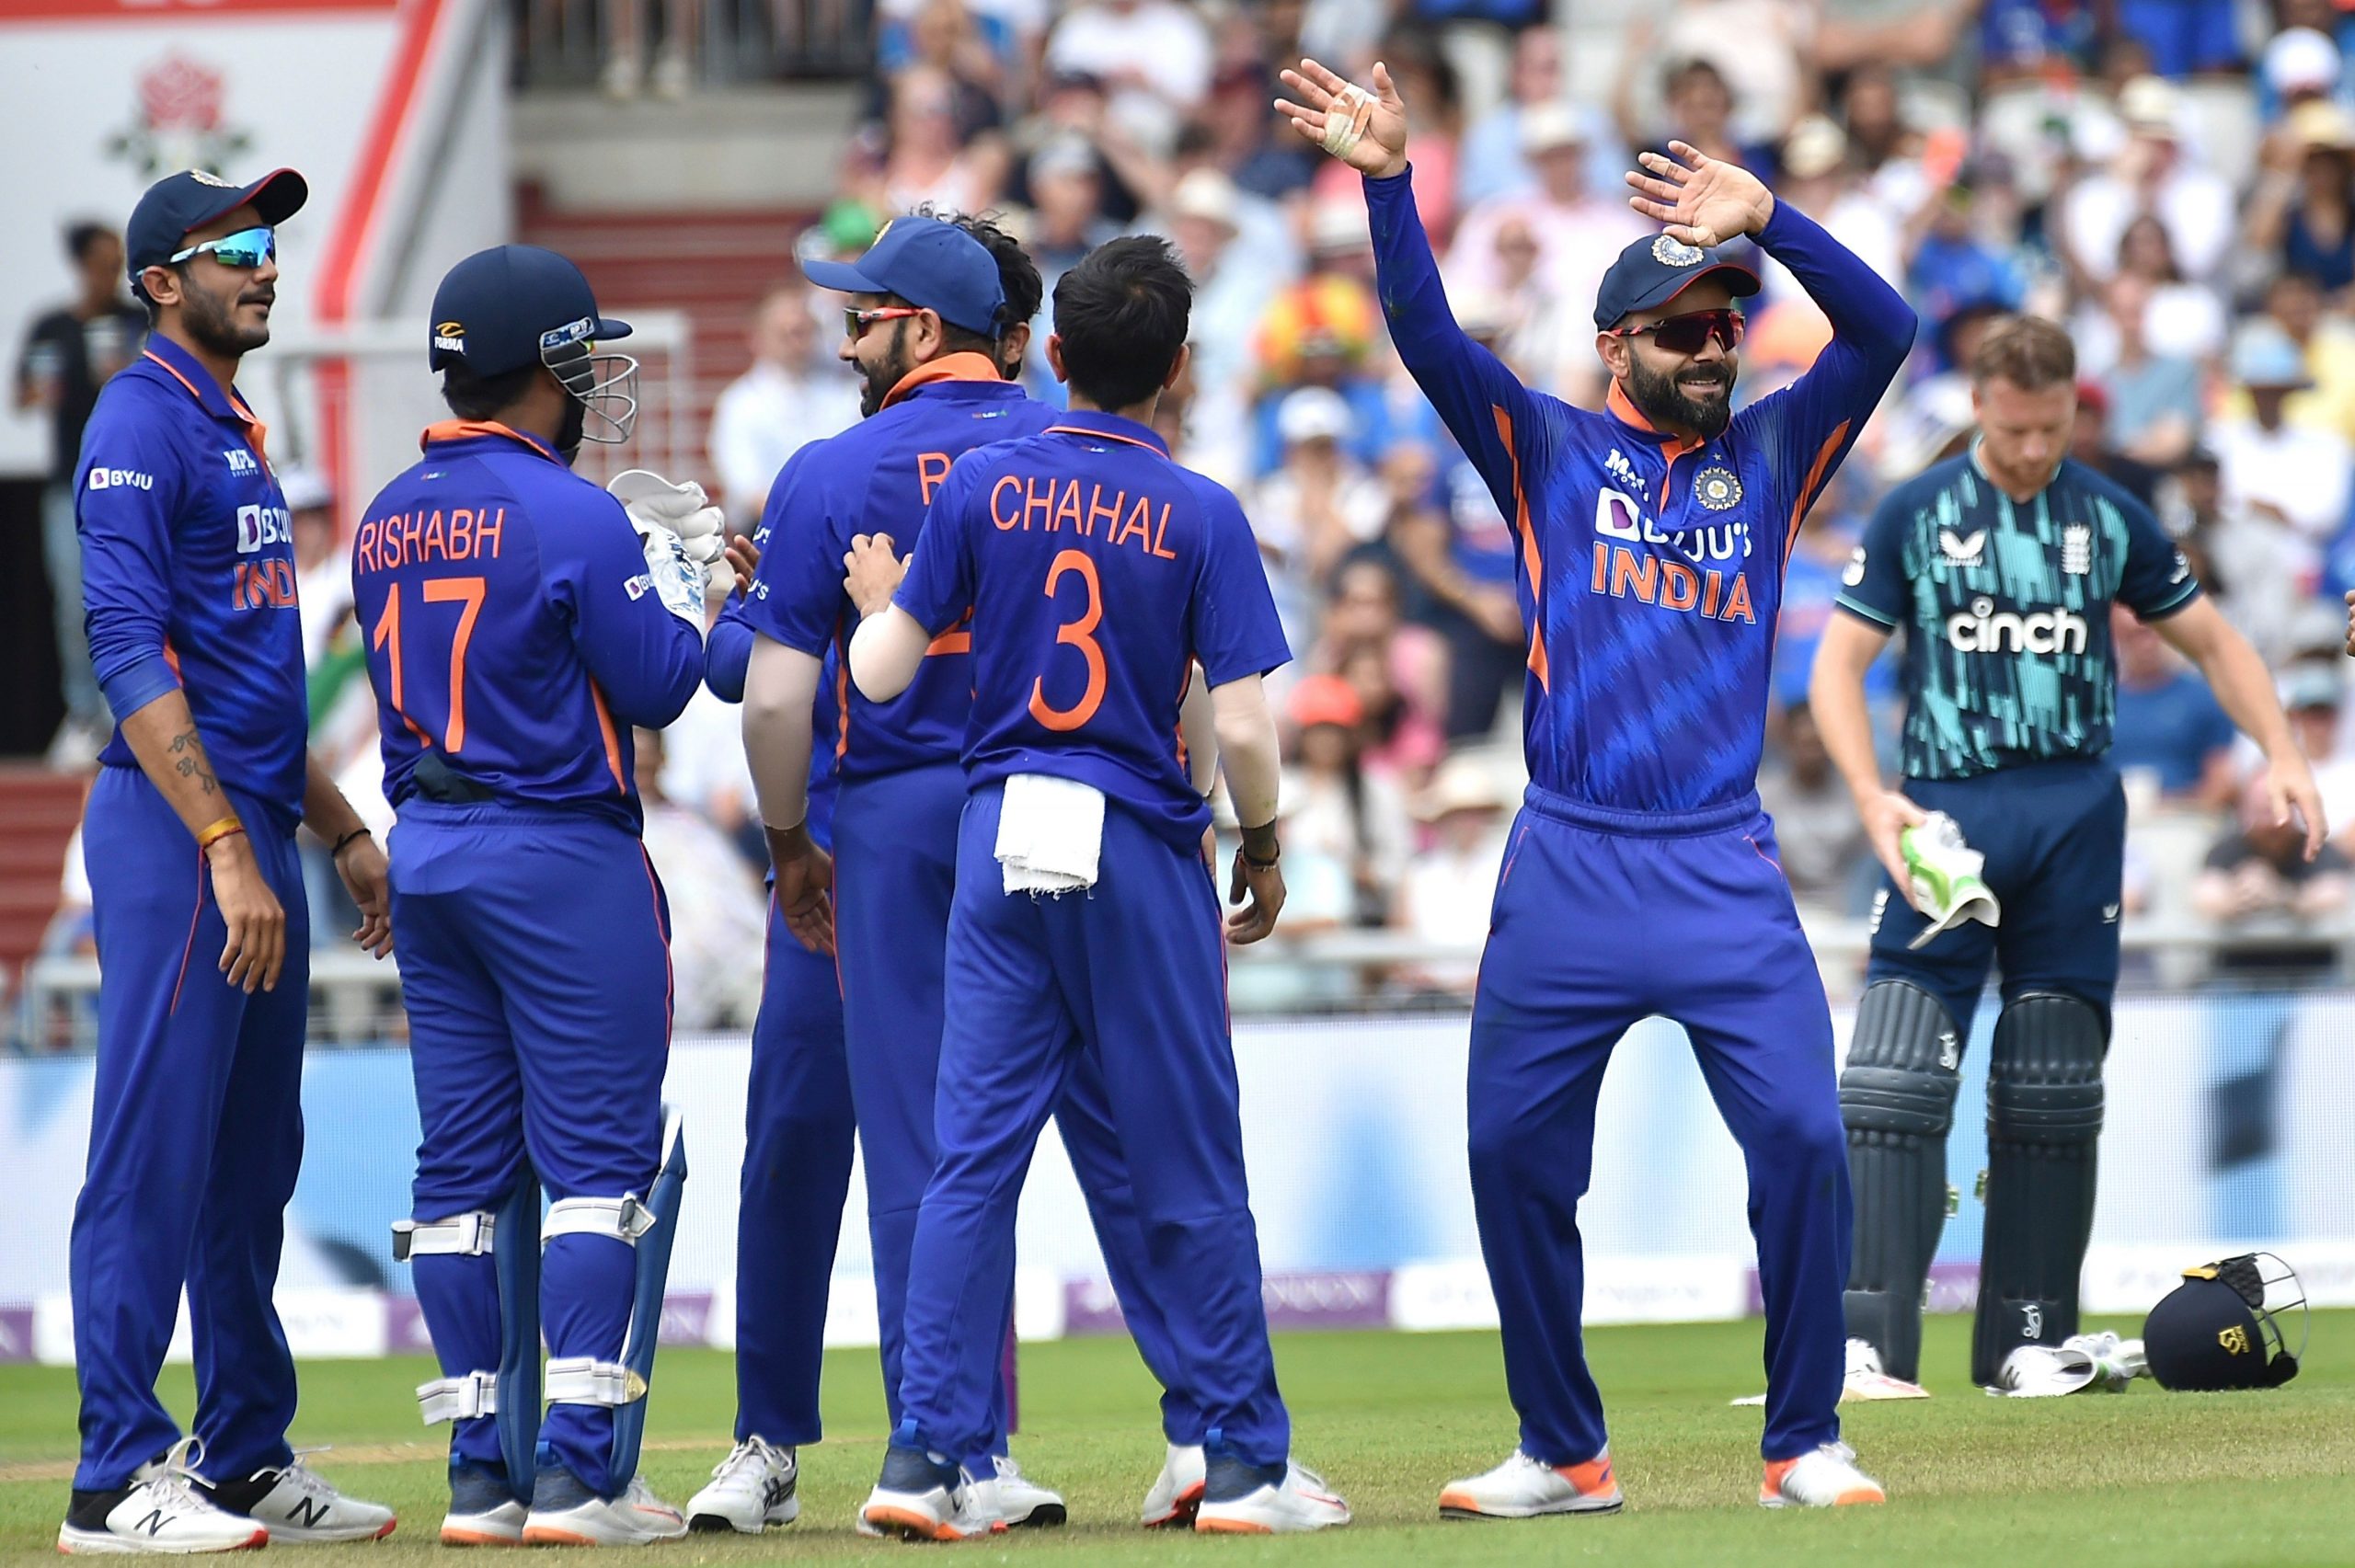 3rd ODI: India beat England by 5 wickets, seal series 2-1